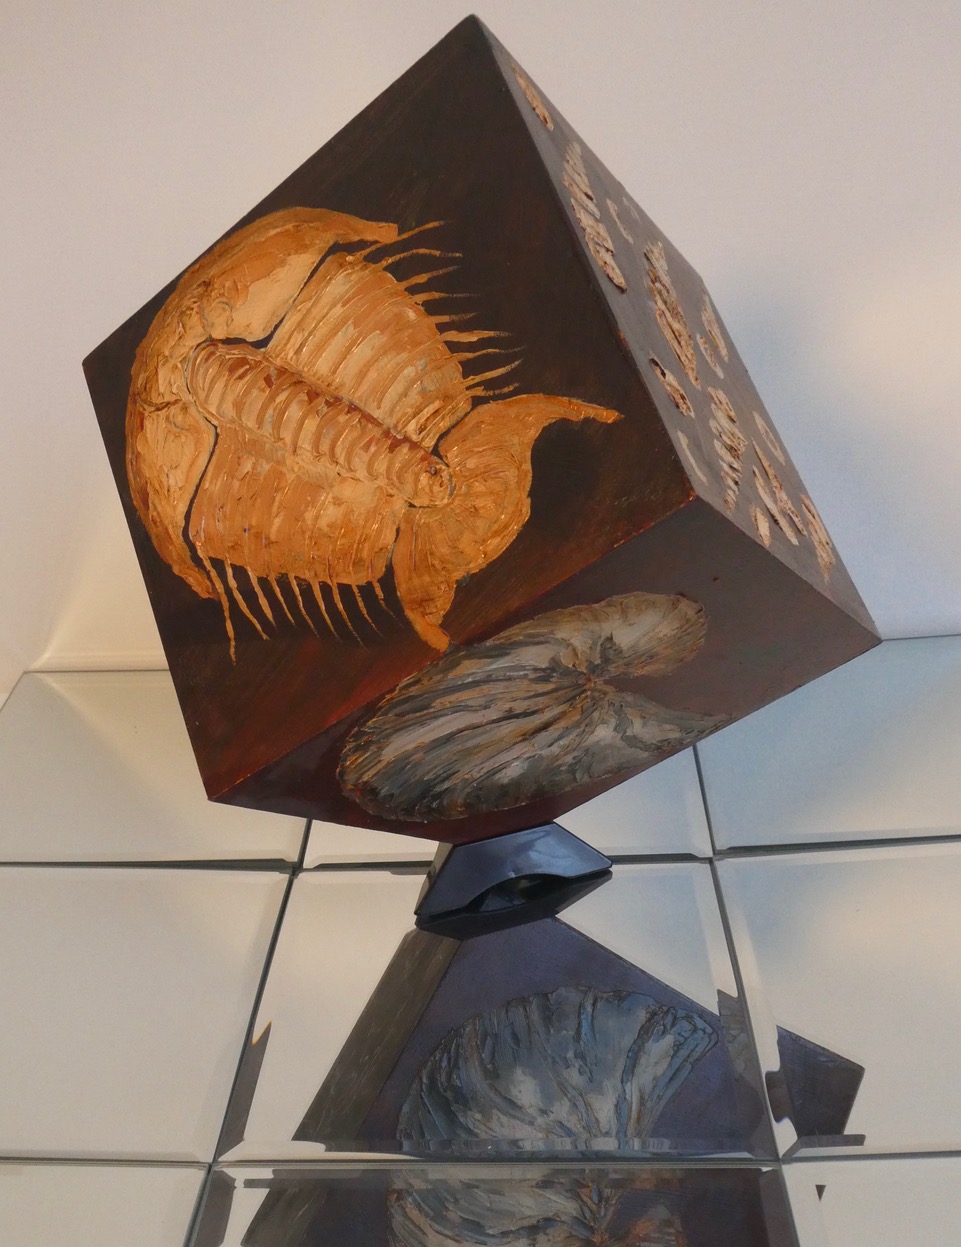 Fossils, oil paint on wooden cube, by Sally Dillon